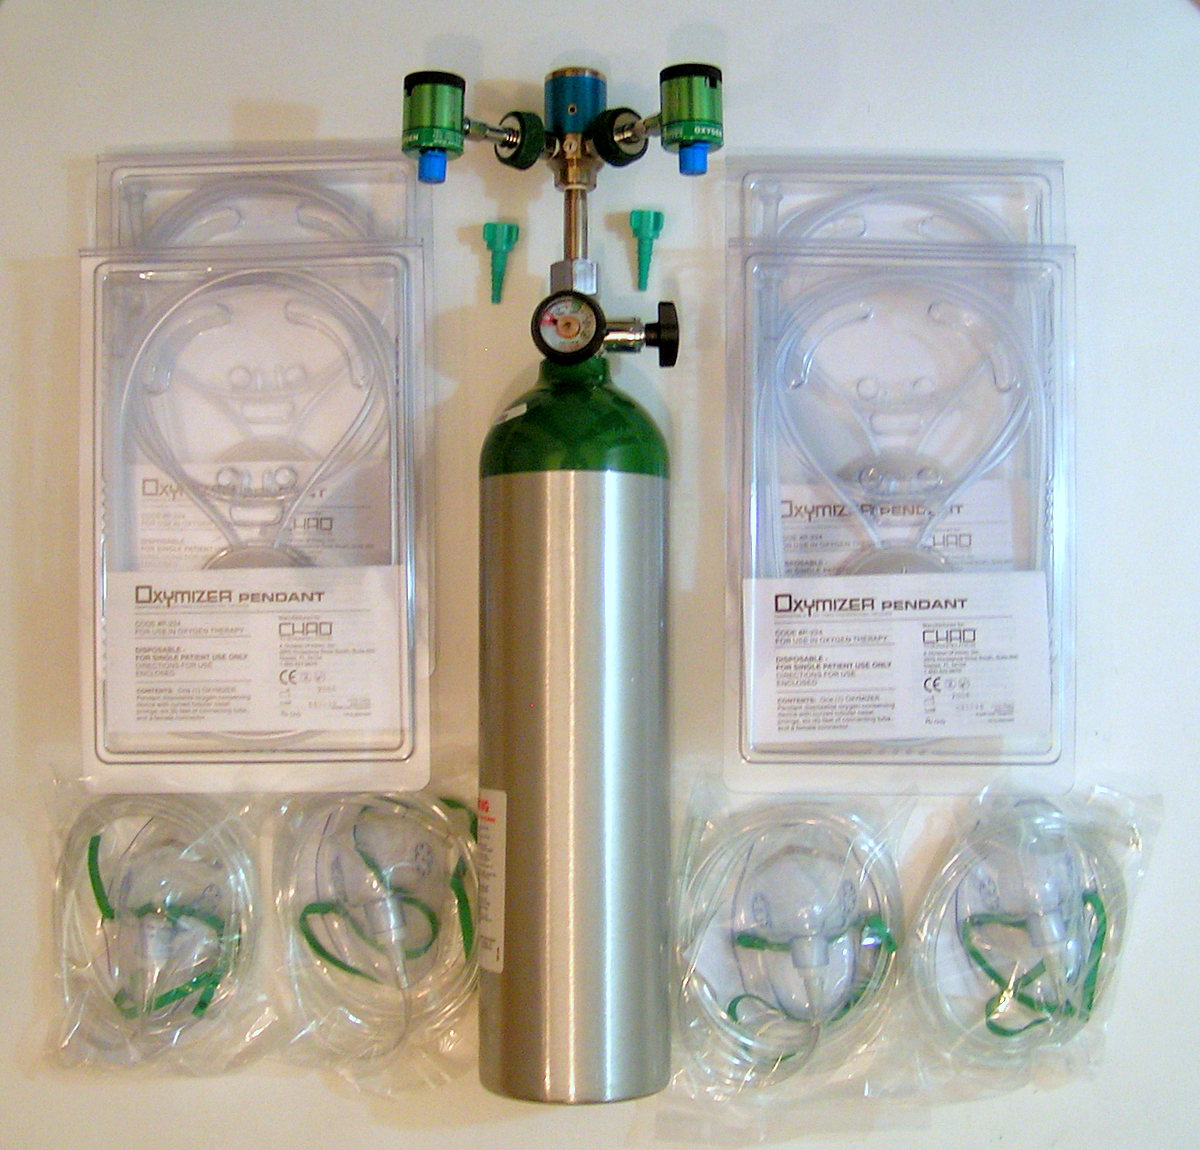 oxygen delivery devices